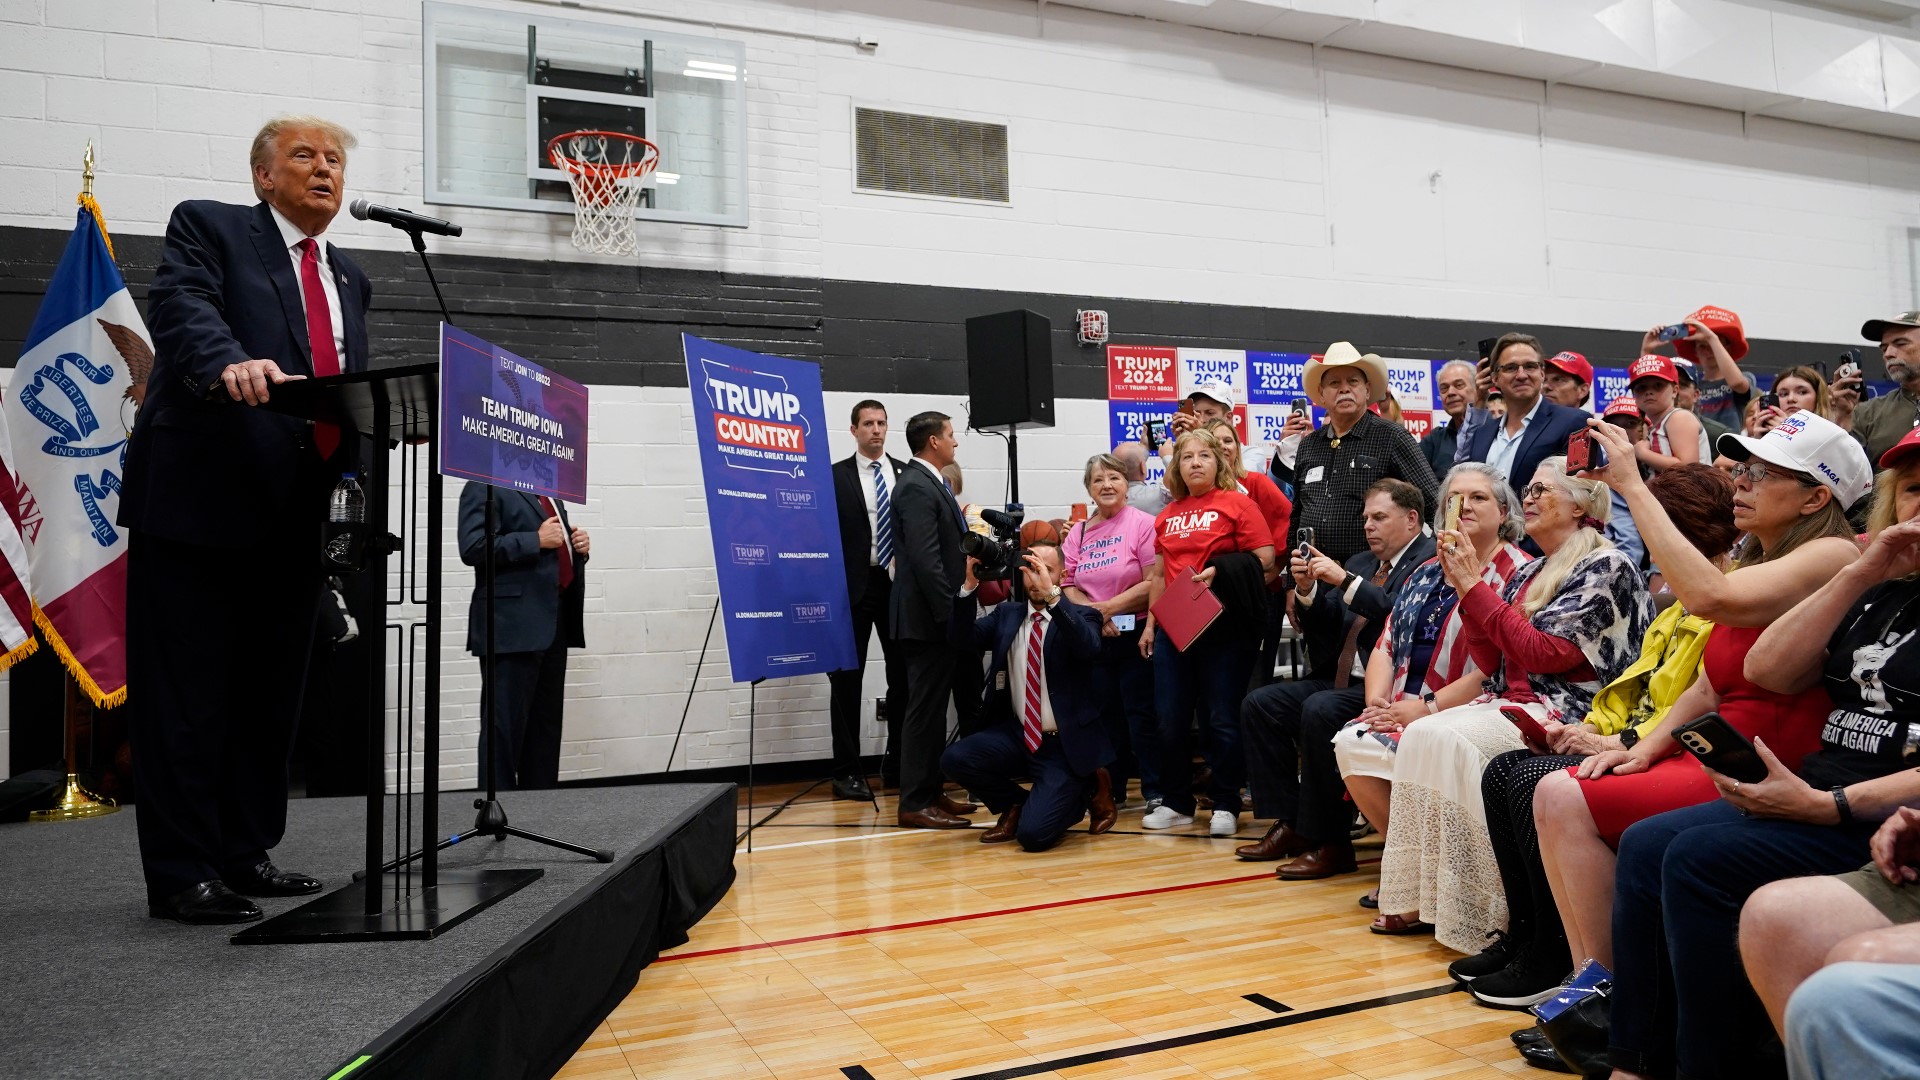 Former President Donald Trump discussed parental choice, the border crisis and foreign policy in Des Moines today, ahead of his Fox News town hall in Clive.